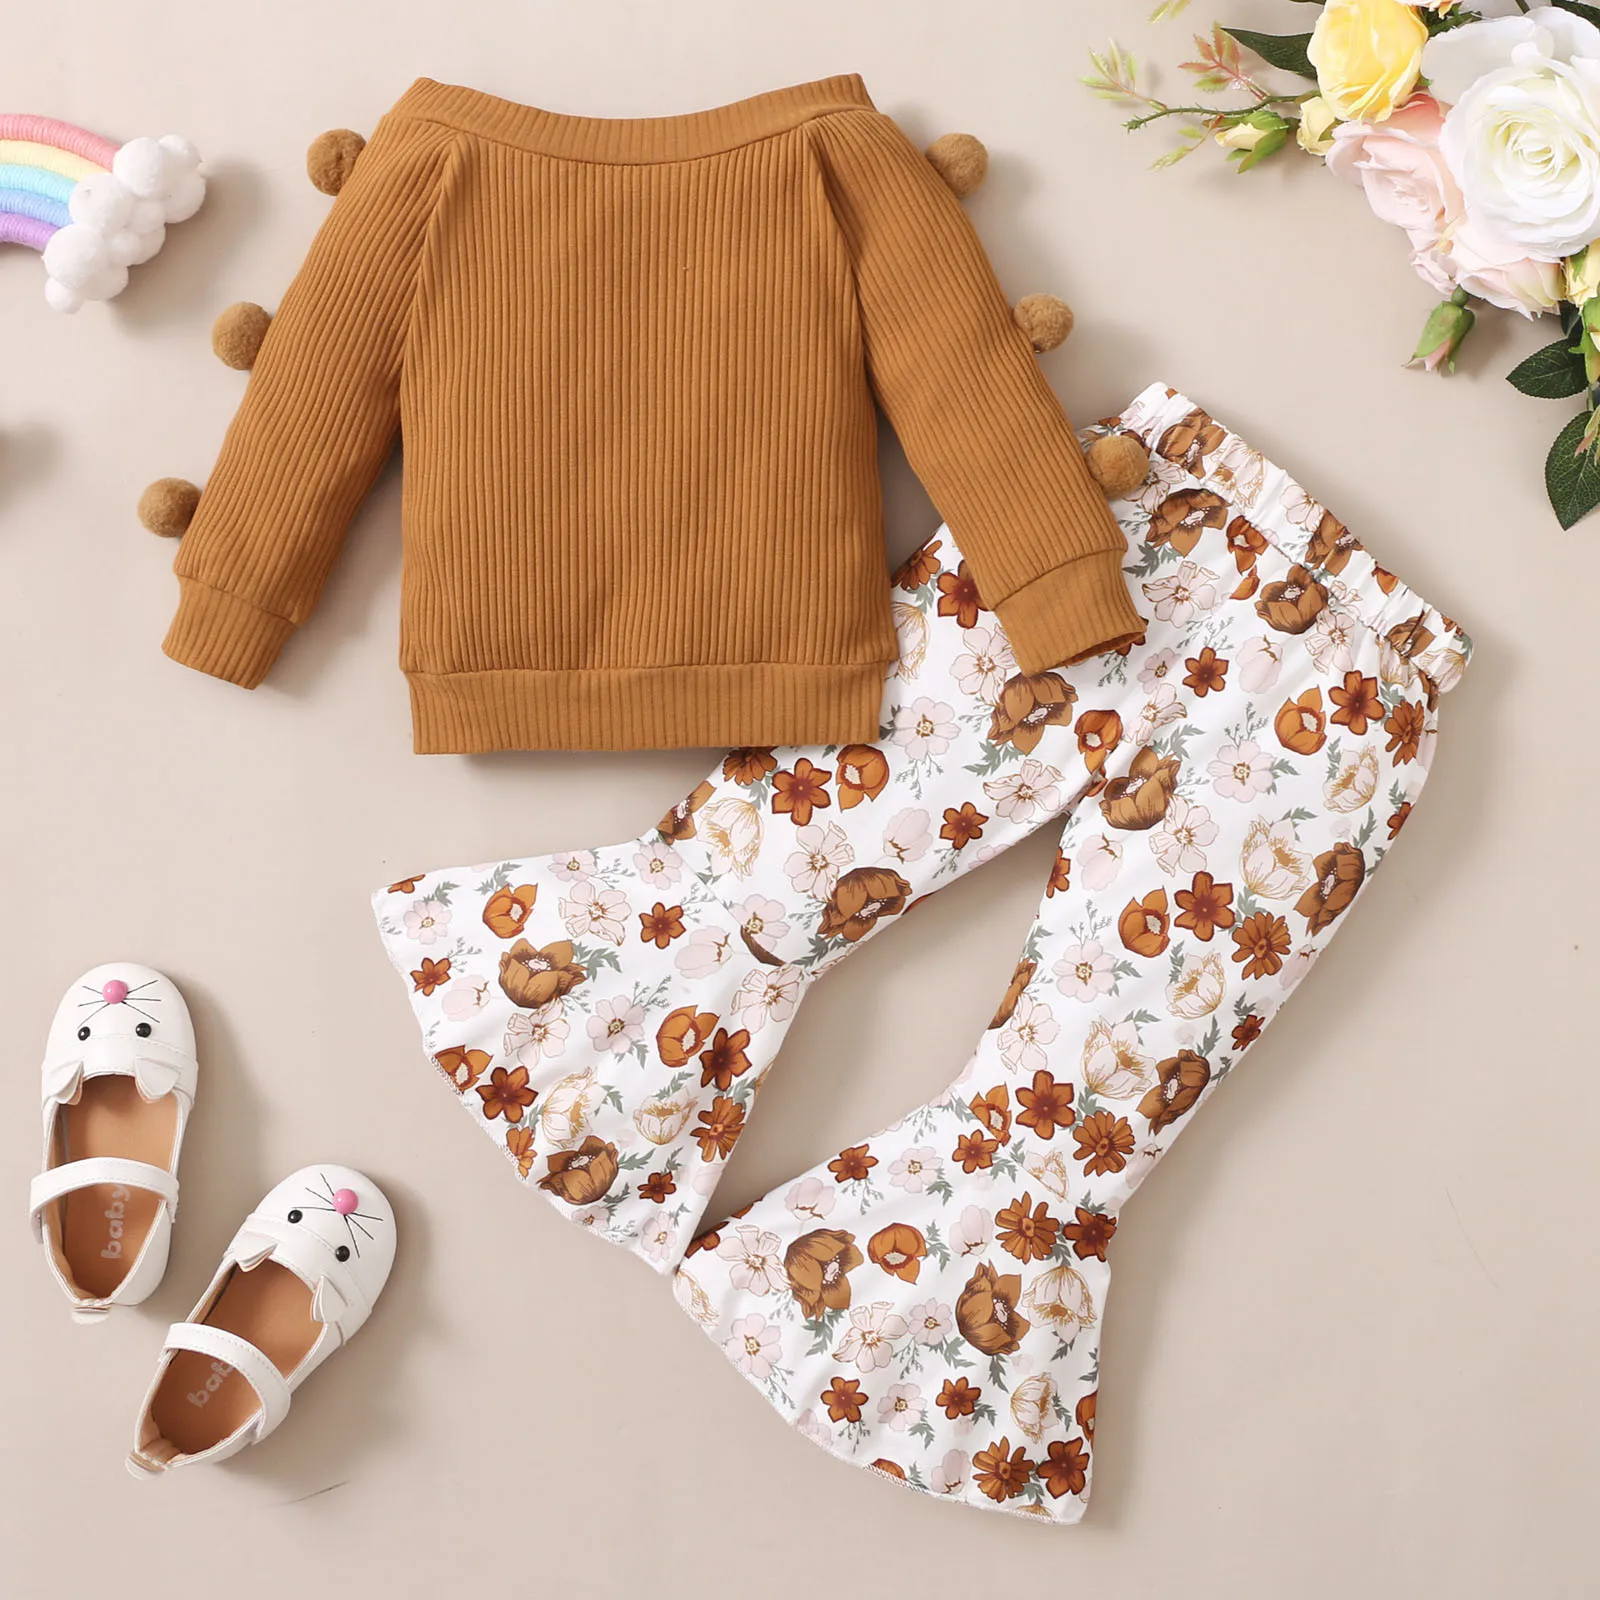 Autumn Winter Toddler Girls Clothes Set Fur Ball Long Sleeve Top Flare Pants 2PCS Girl Casual Outfits 6 Month To 4 Years Baby Clothing Set discount